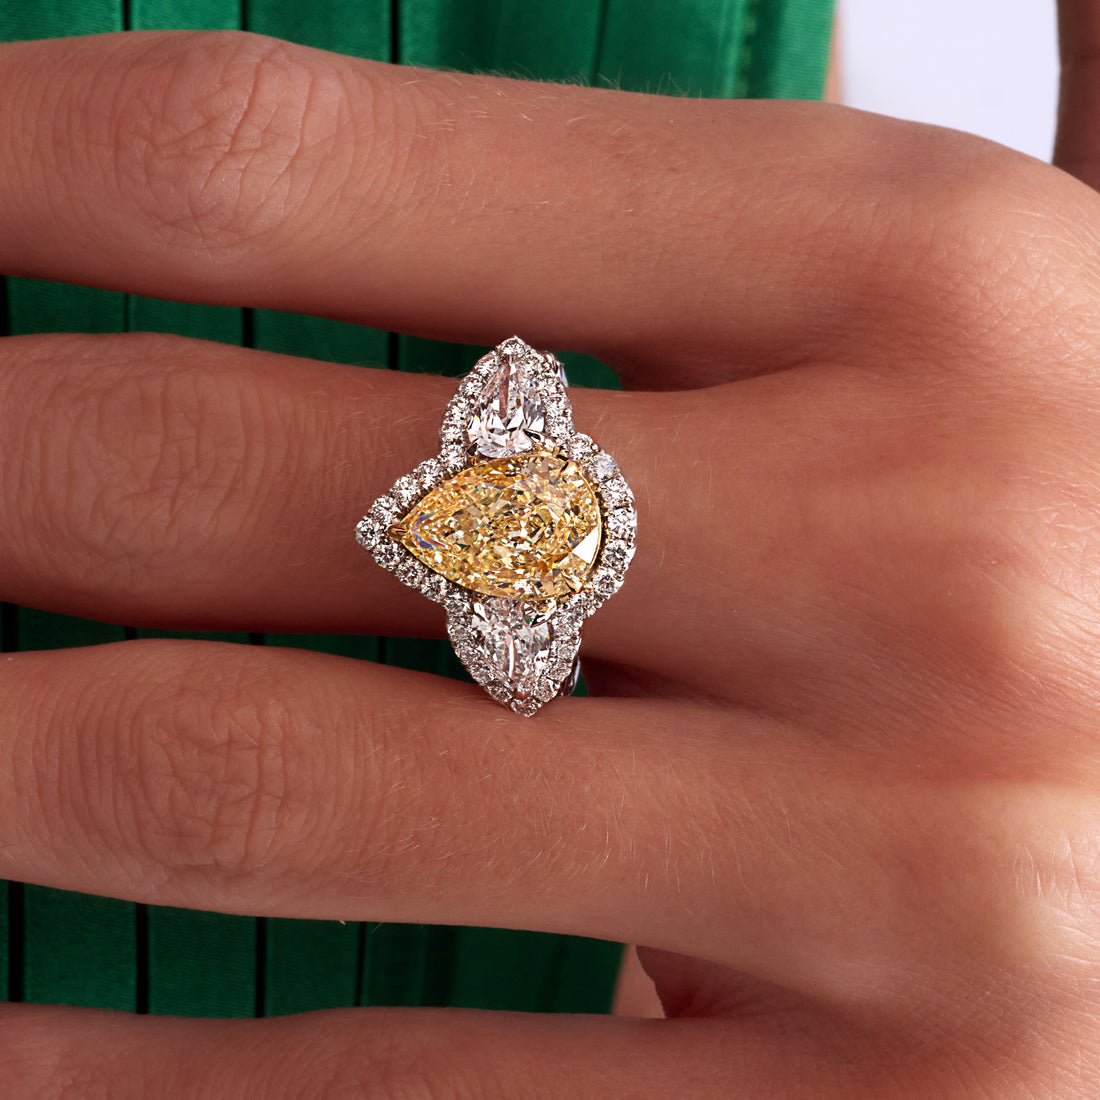 5.69 CT. Pear Yellow Diamond and Pear and Round Brilliant Diamond Ring in 18K Yellow Gold and Platinum